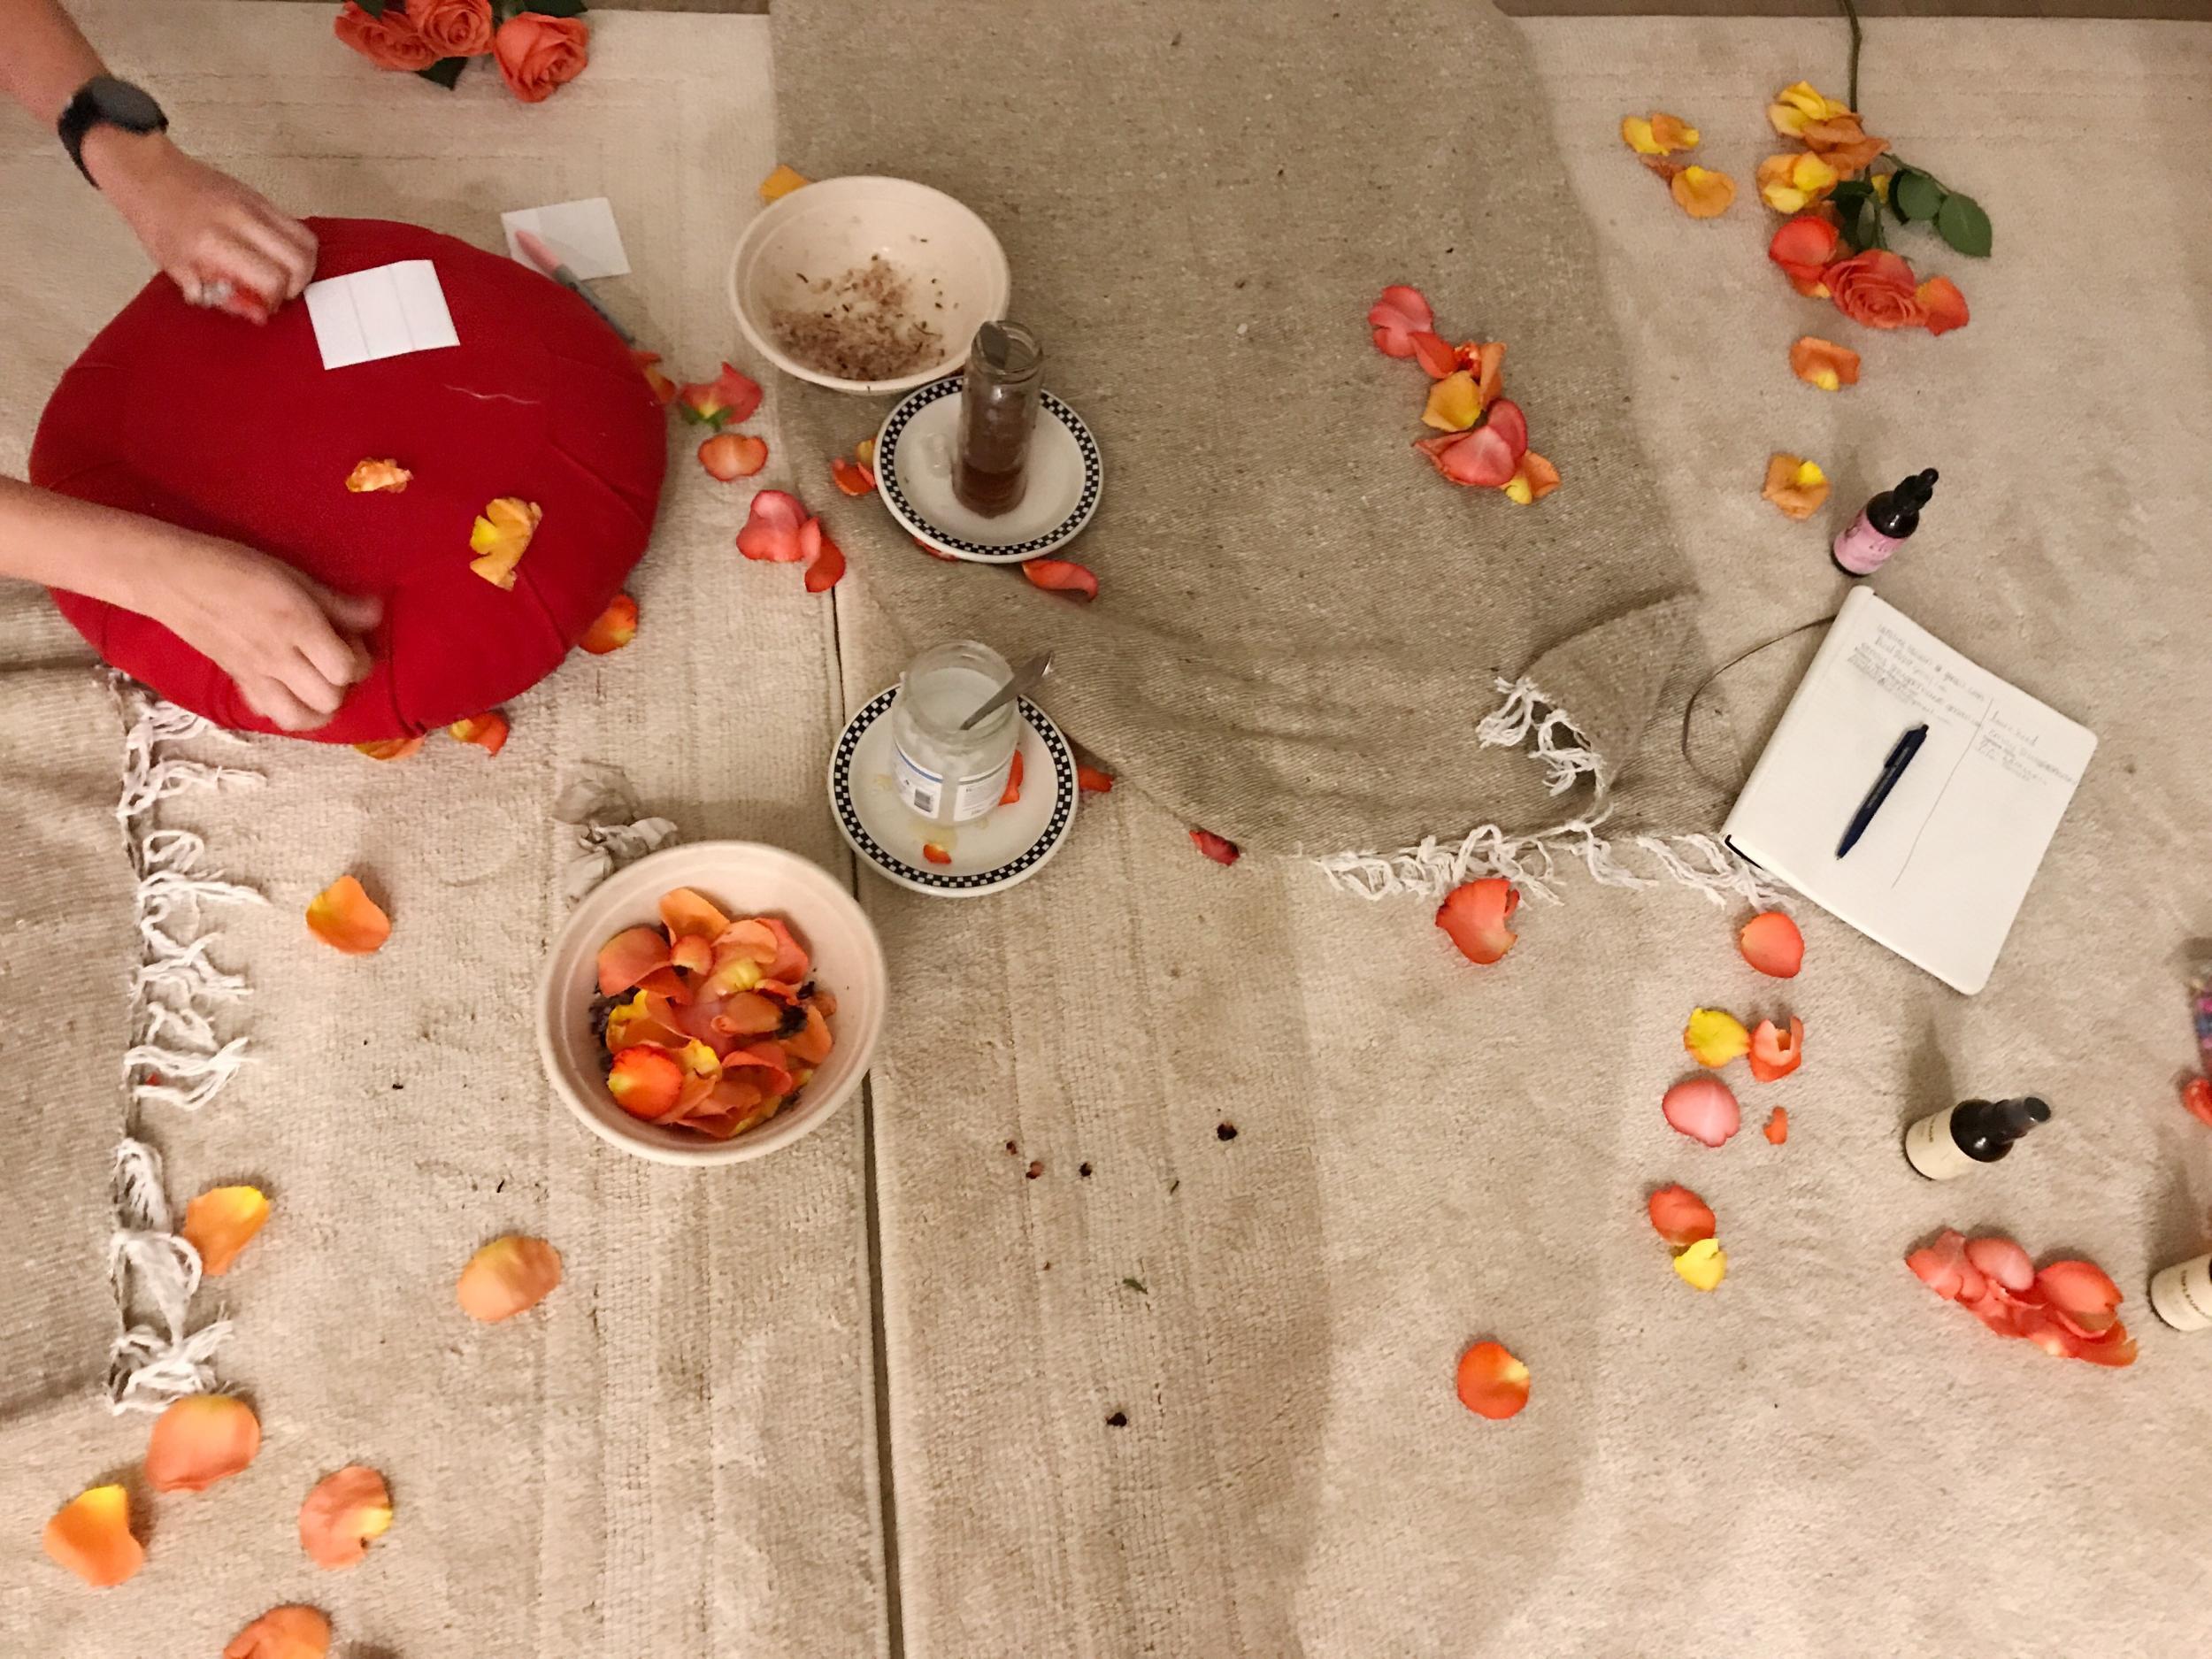 Rose petals were used to clear away tension and spark creativity